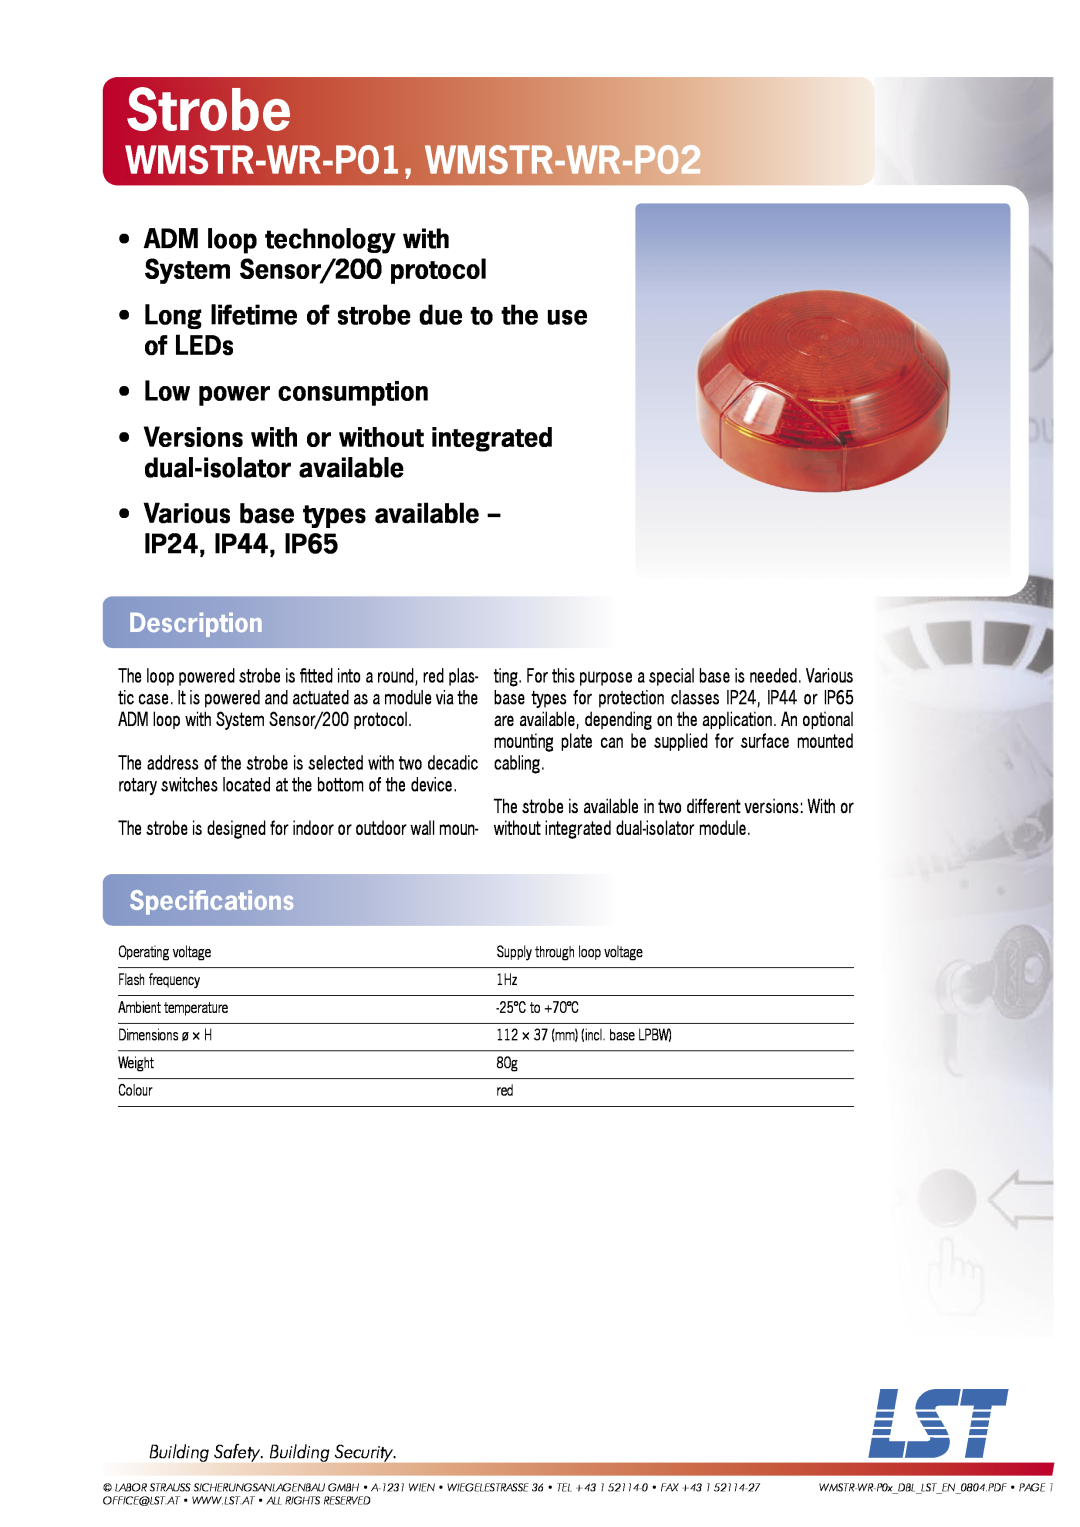 LST WMSTR-WR-P01, WMSTR-WR-P02 specifications Description, Speciﬁcations, Building Safety. Building Security, Strobe 